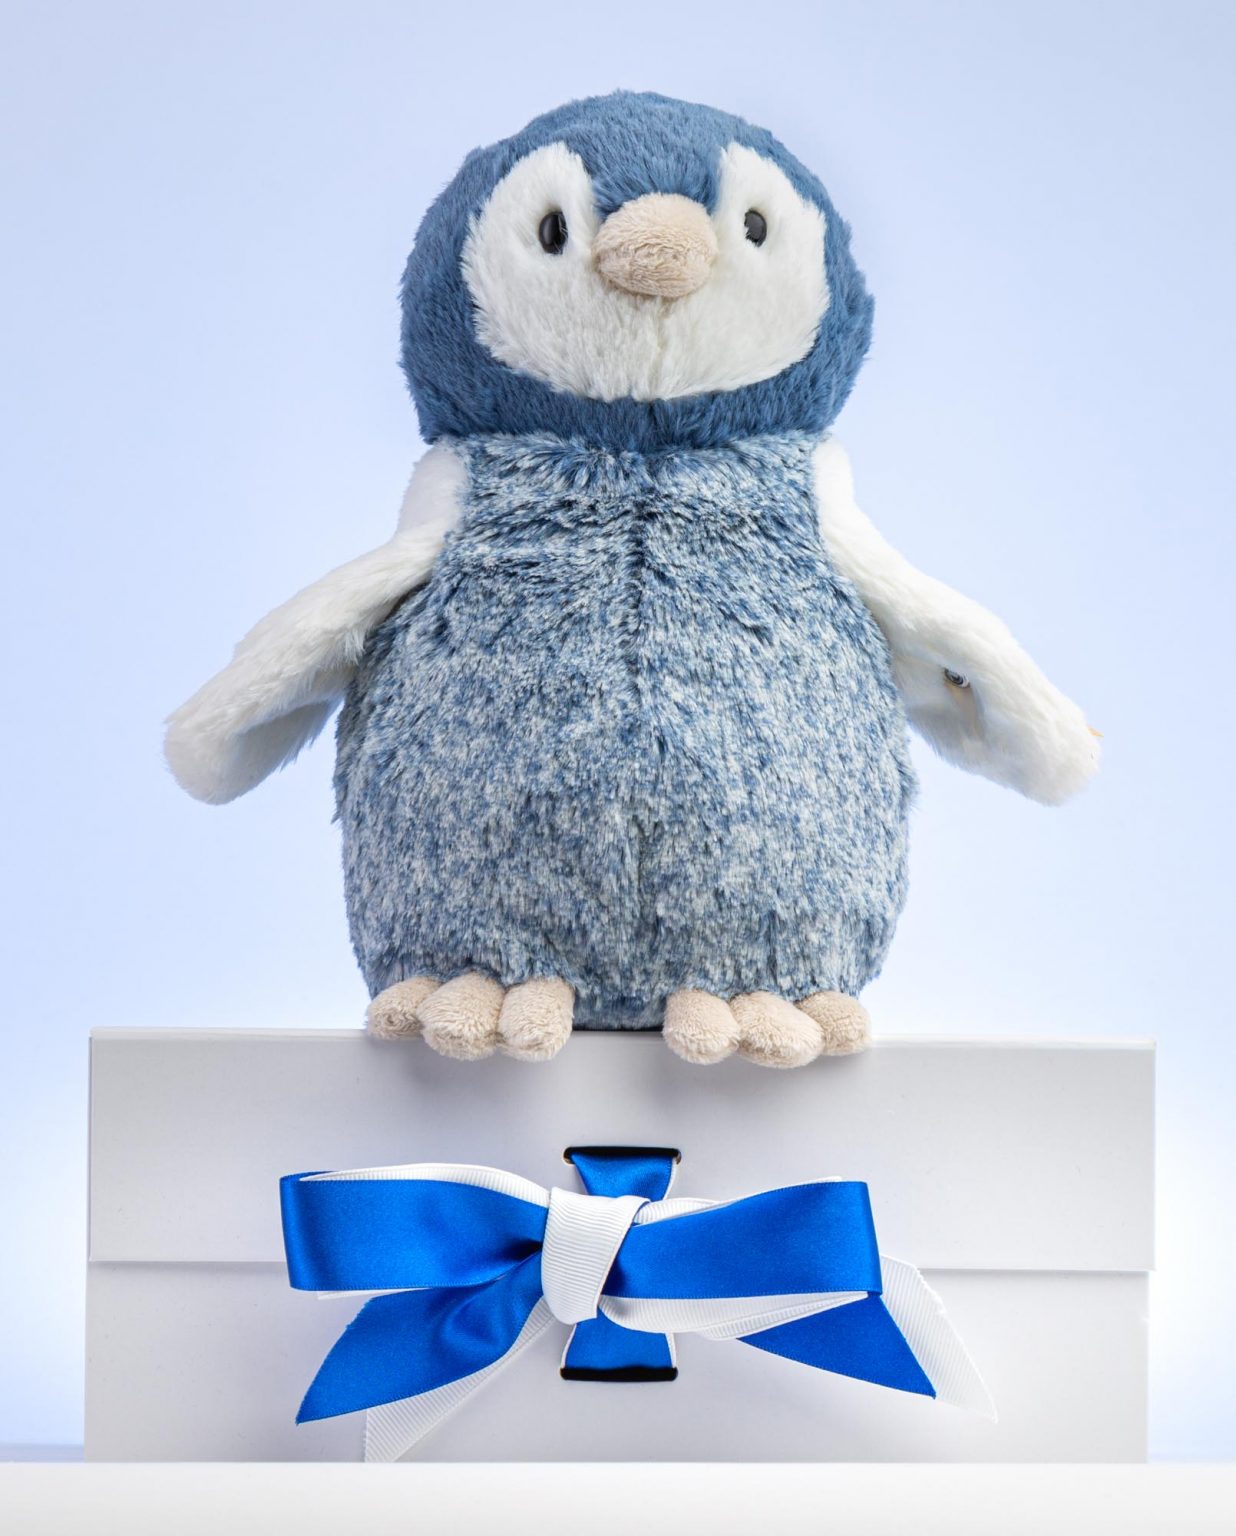 Paule Penguin Soft Toy Gift - Send a Cuddly